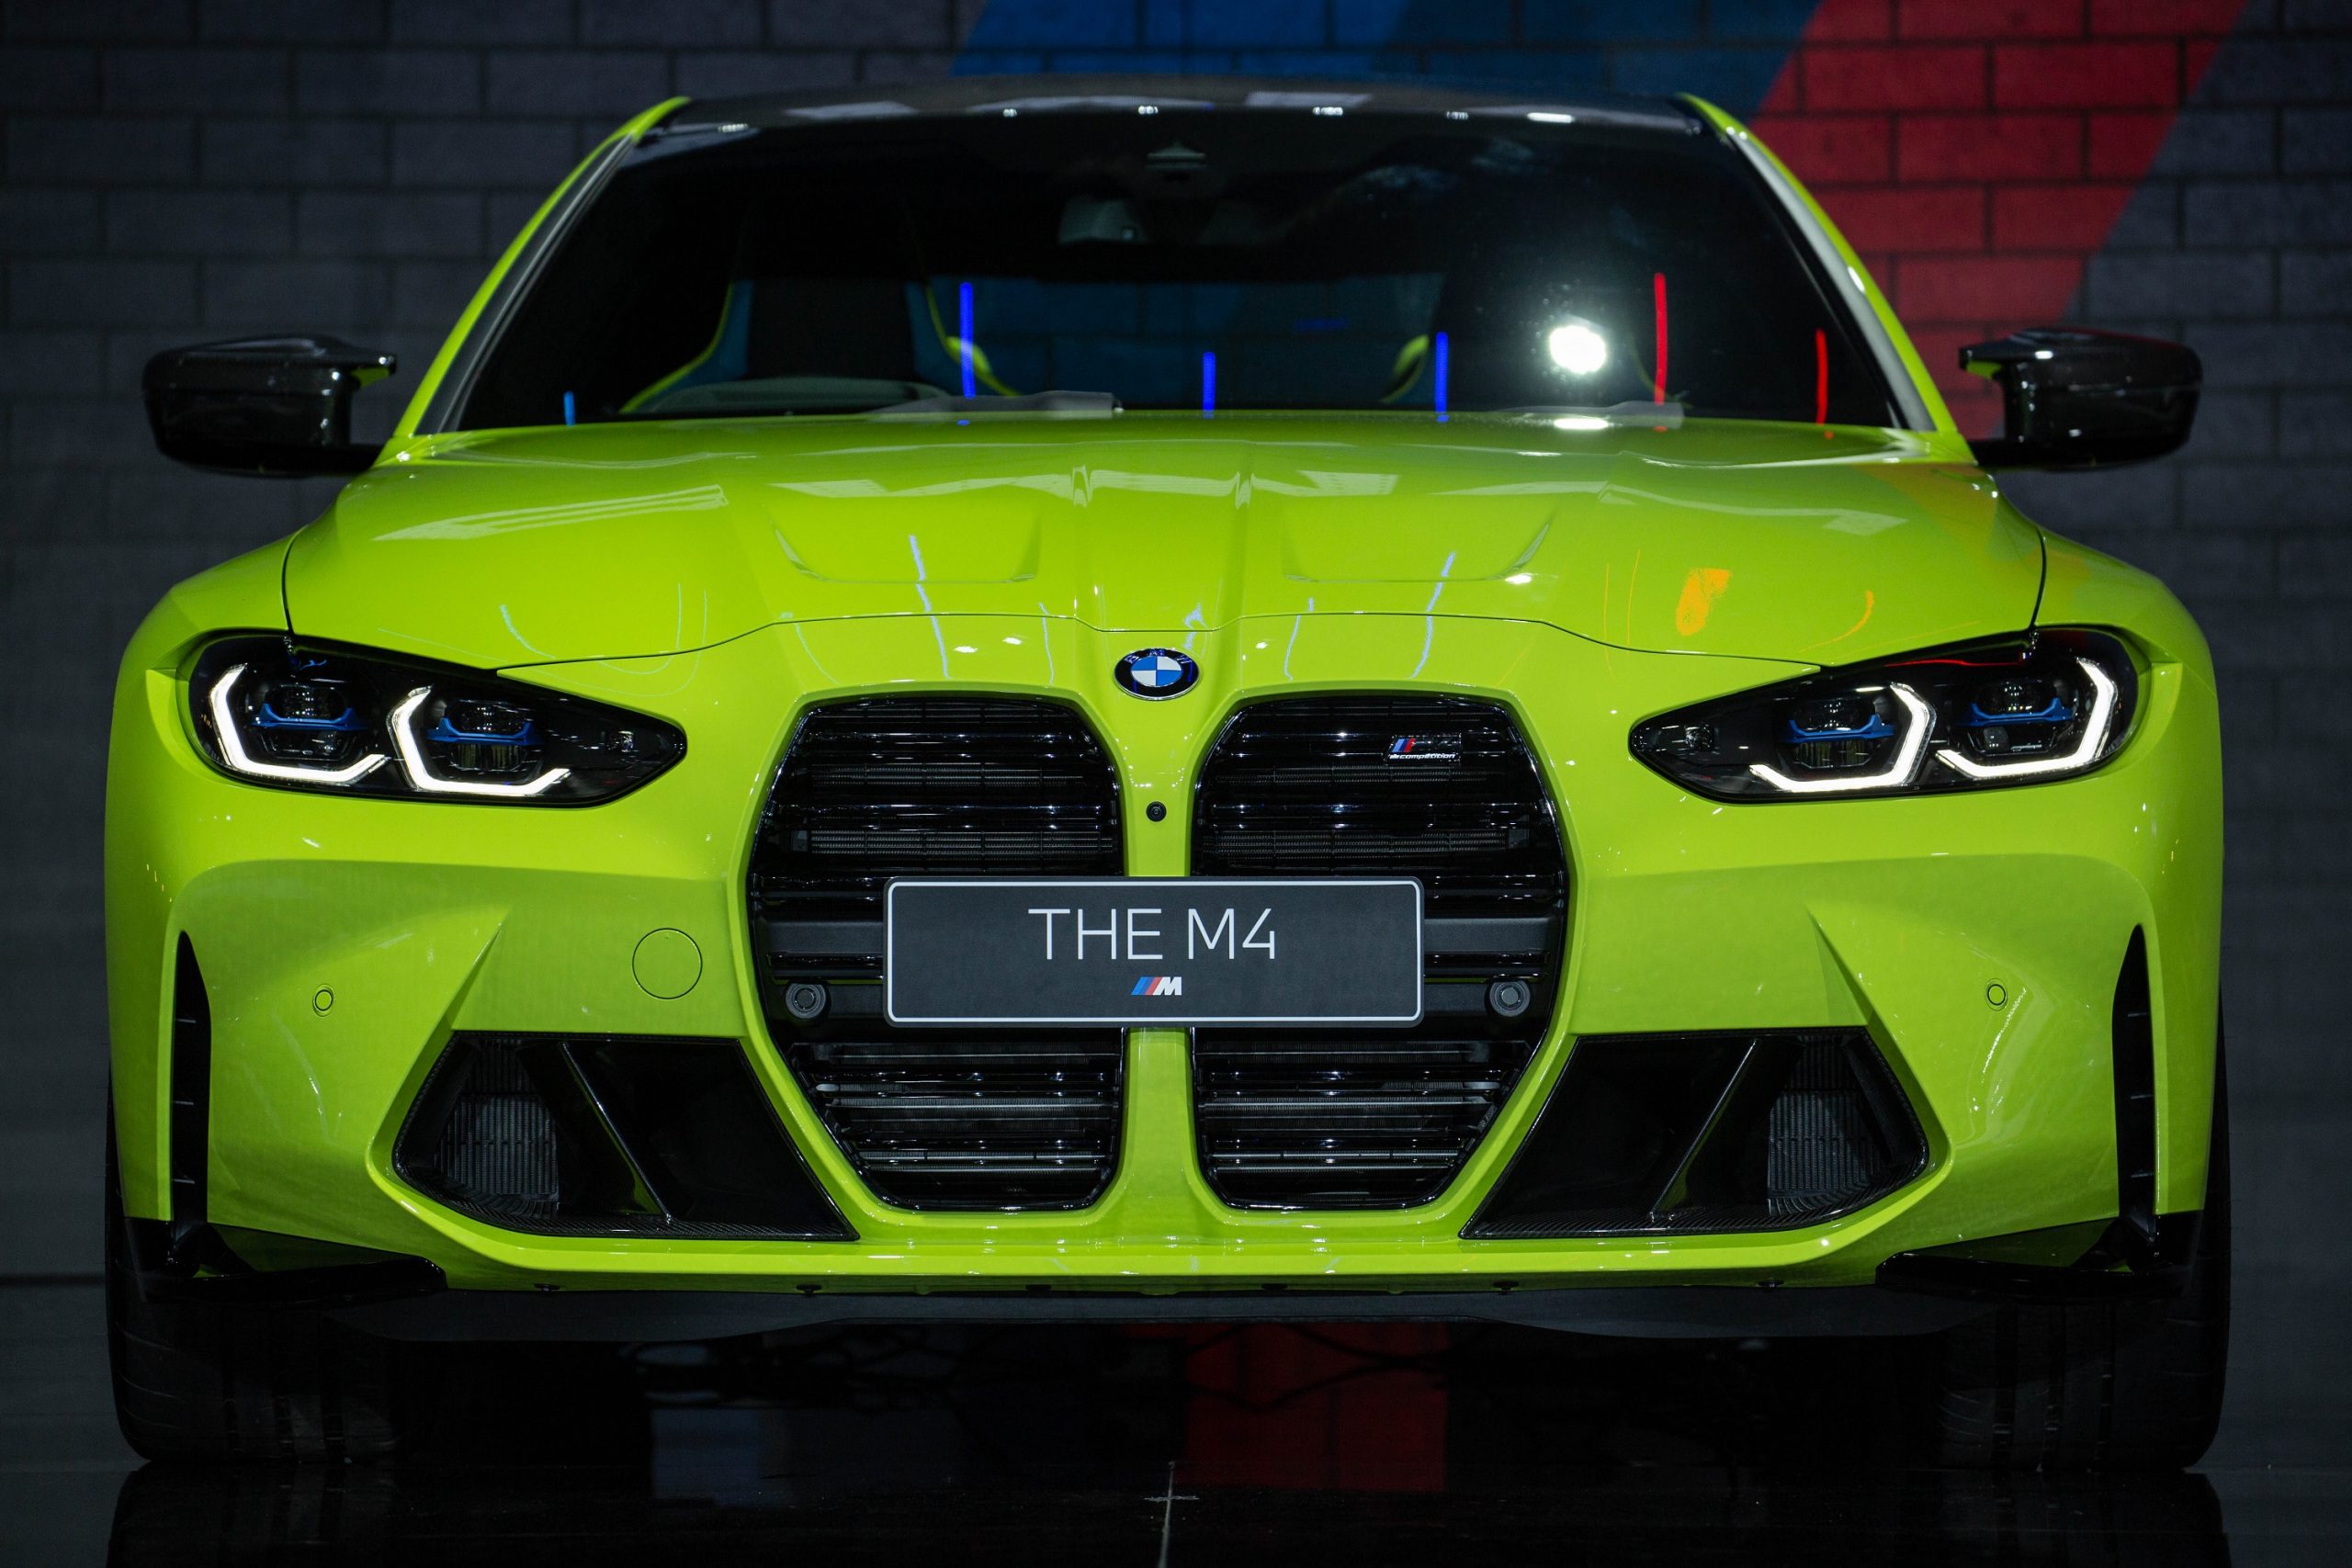 A full-frontal shot of the BMW kidney grille on the new M4